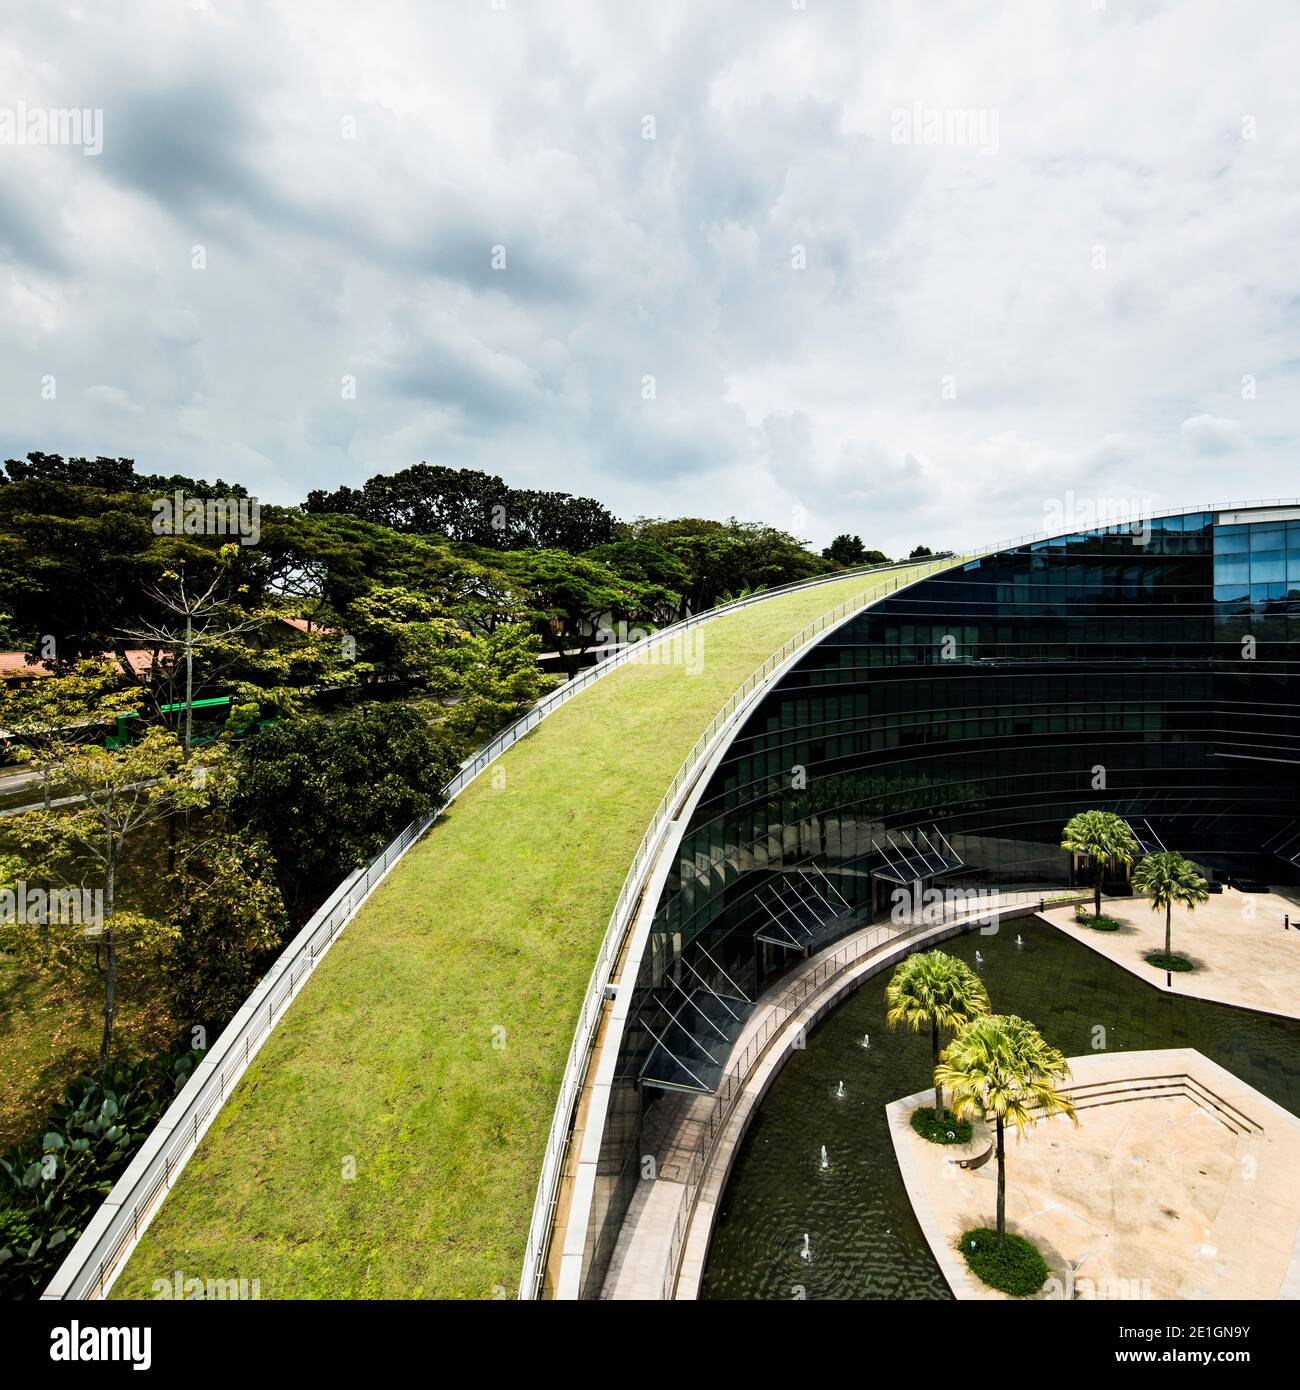 Exterior view of the School of Art, Design & Media at NTU, a glass building with green roof, Singapore. Stock Photo